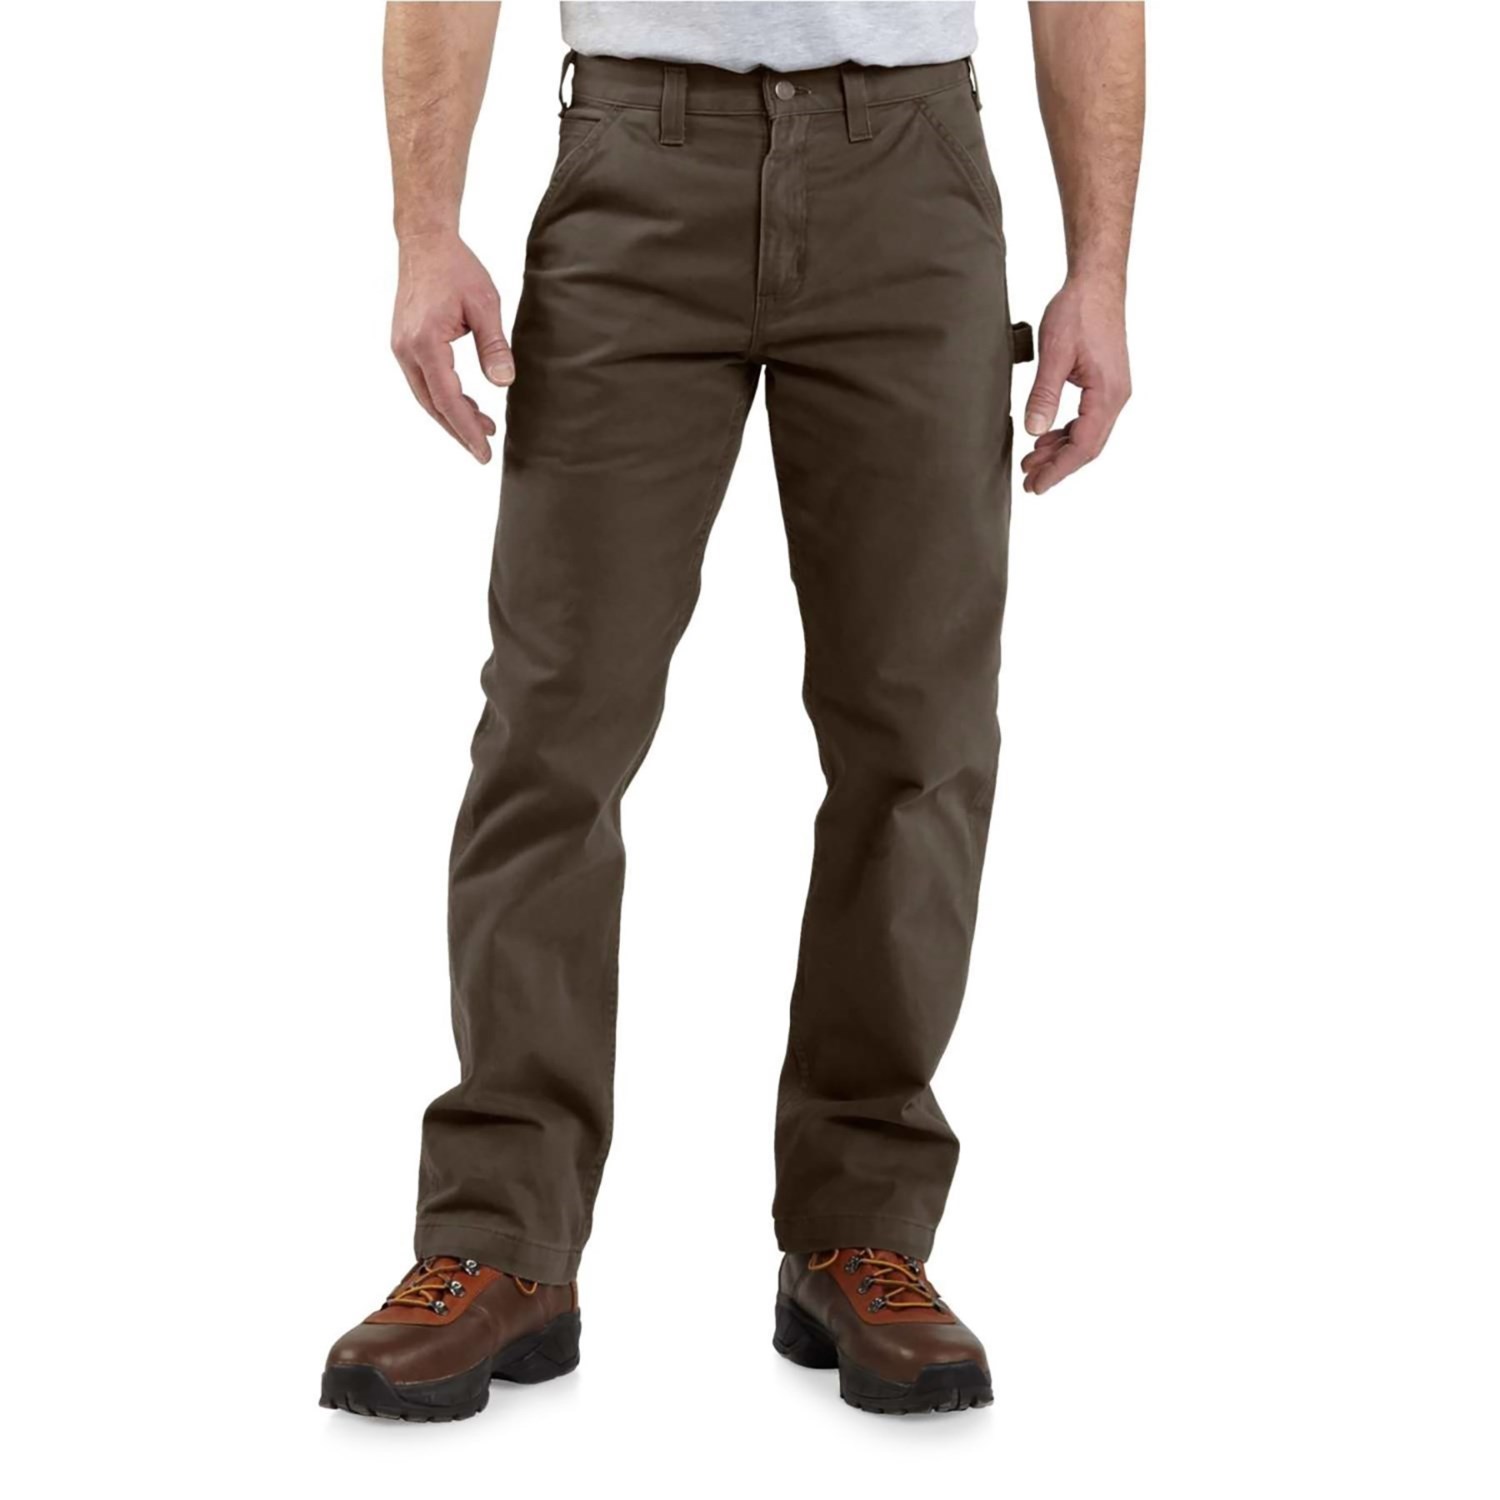 Carhartt B324 Washed Twill Dungarees (For Big and Tall Men)